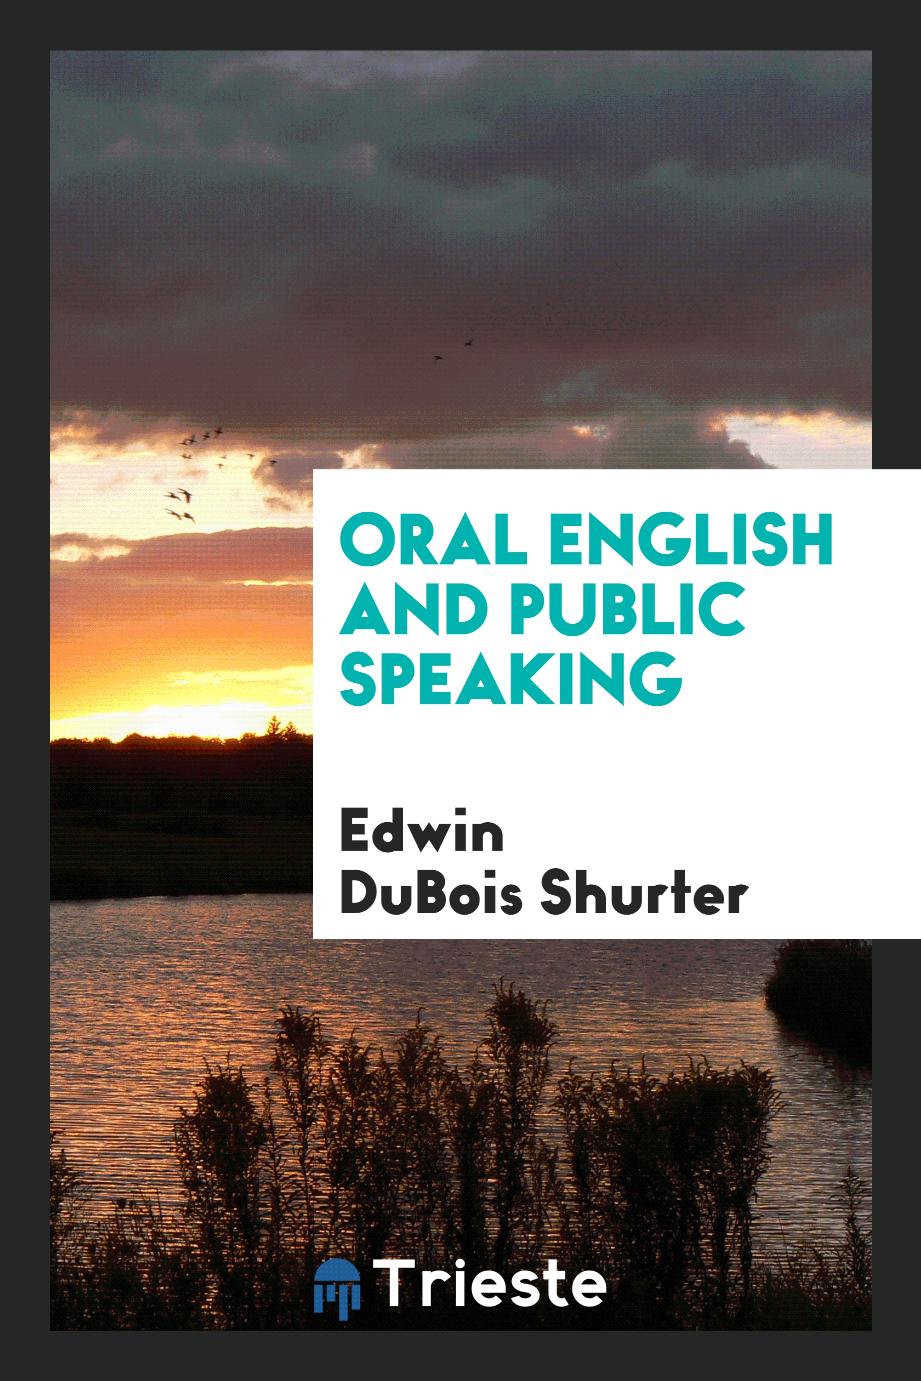 Oral English and public speaking